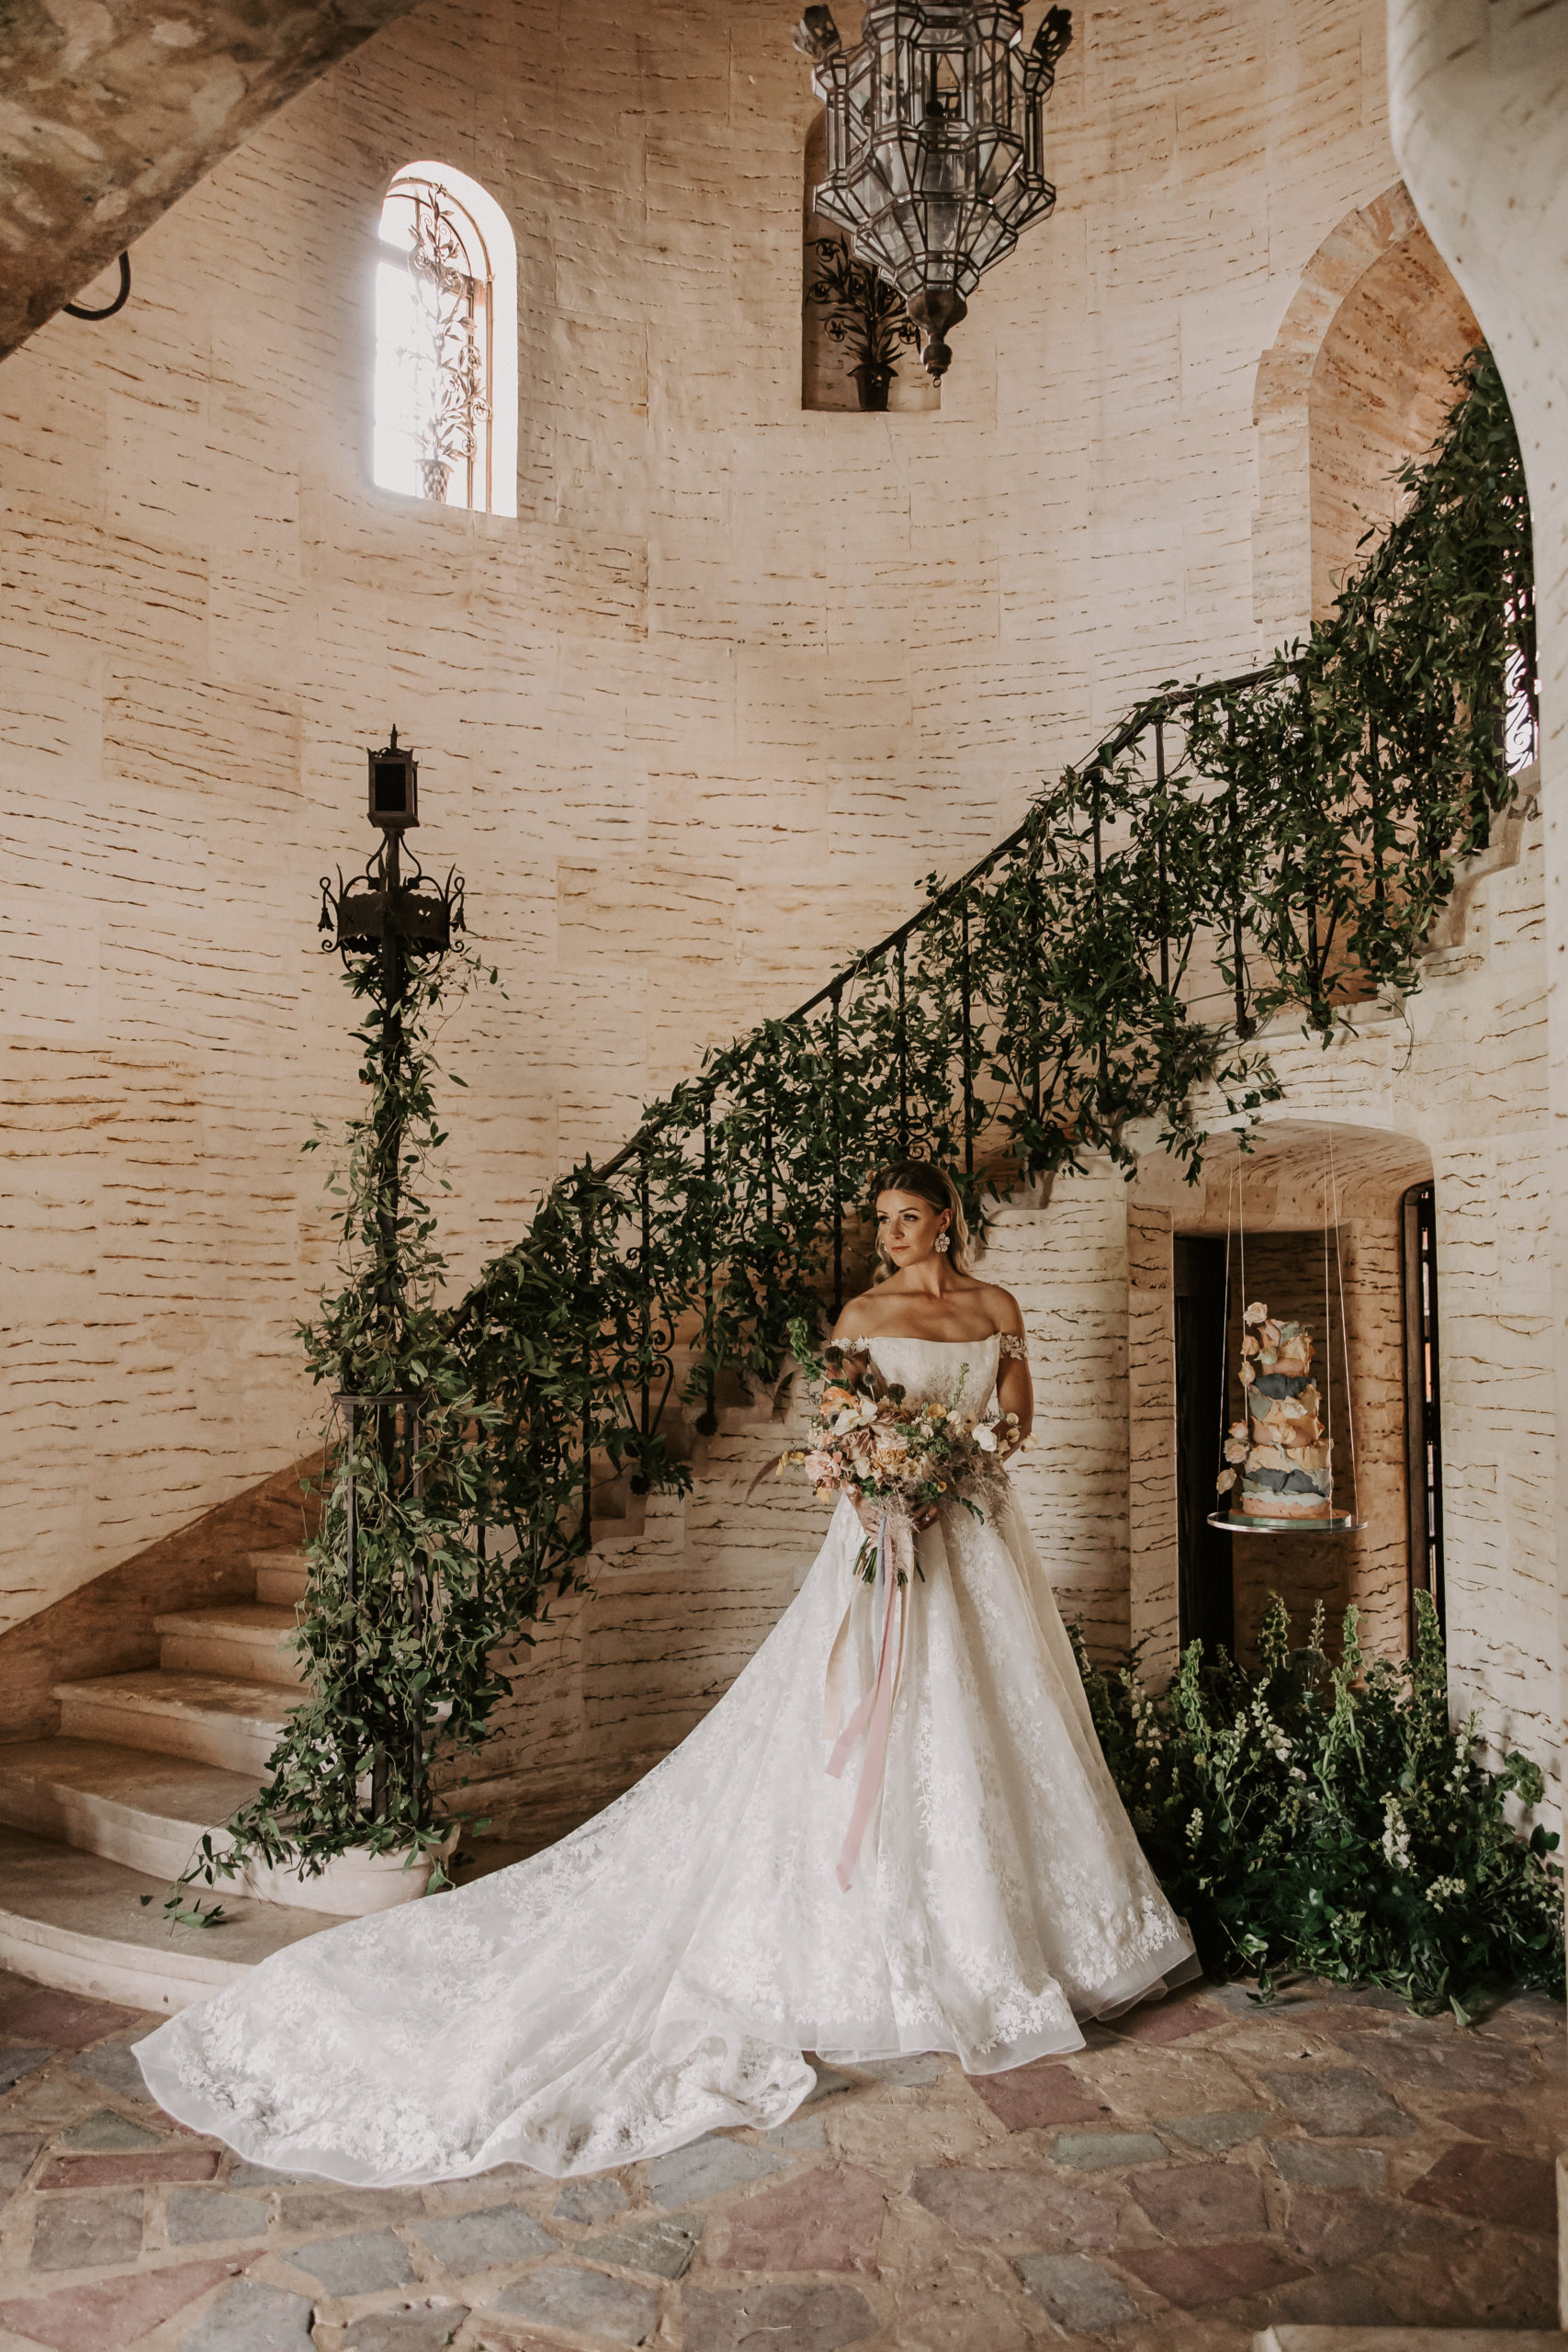 The bride looks like she is walking into a dream wearing three different gowns and right on trend from The Bridal Finery